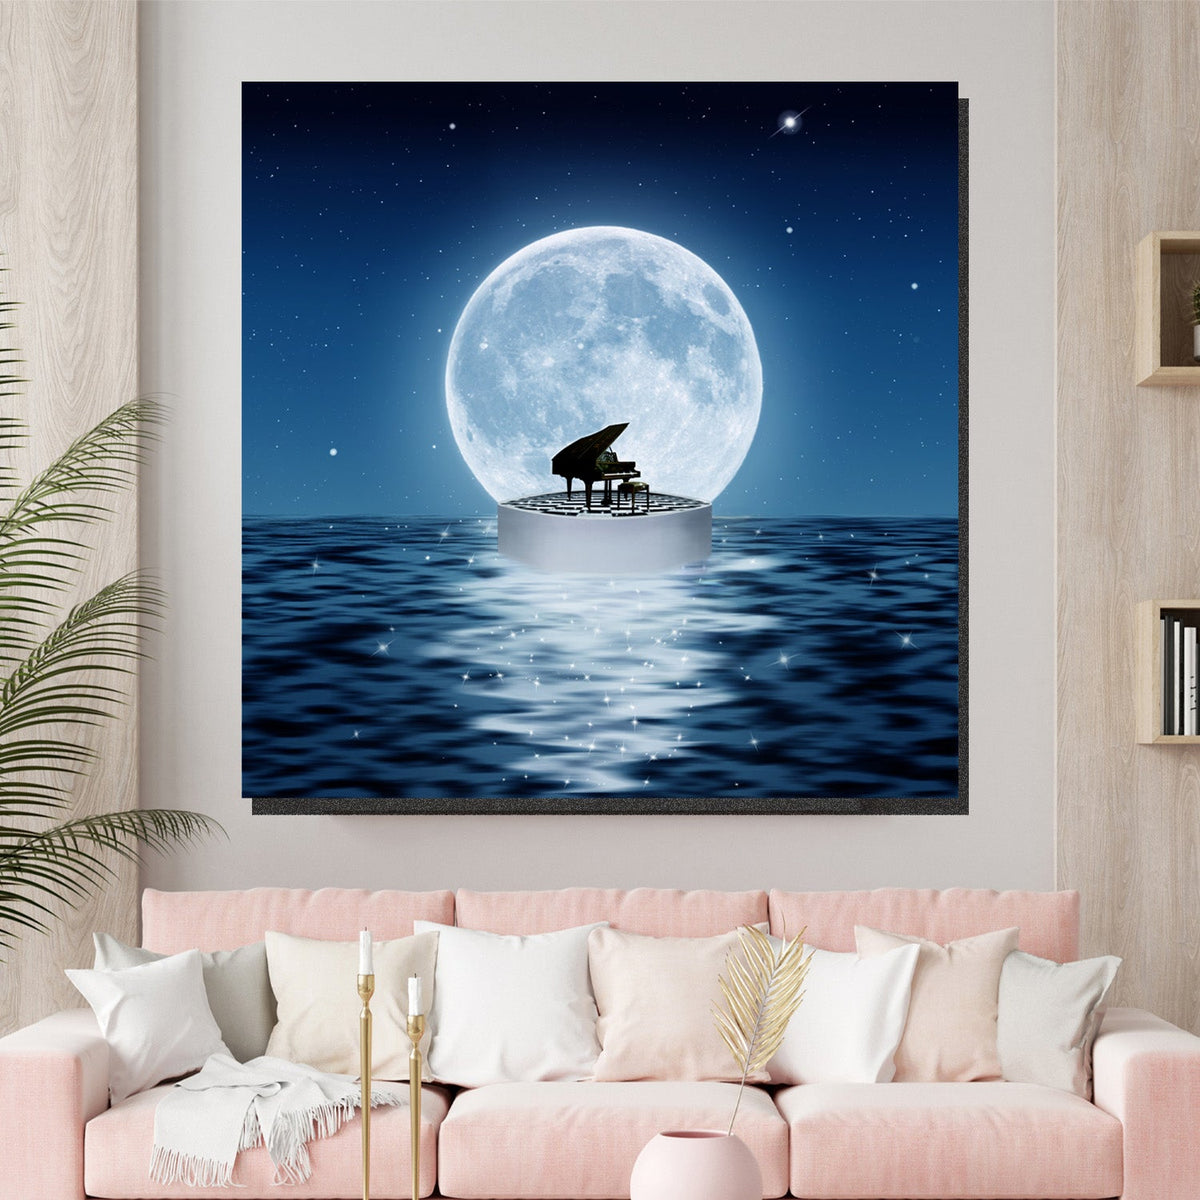 https://cdn.shopify.com/s/files/1/0387/9986/8044/products/PianoAndFullMoonCanvasArtprintStretched-2.jpg